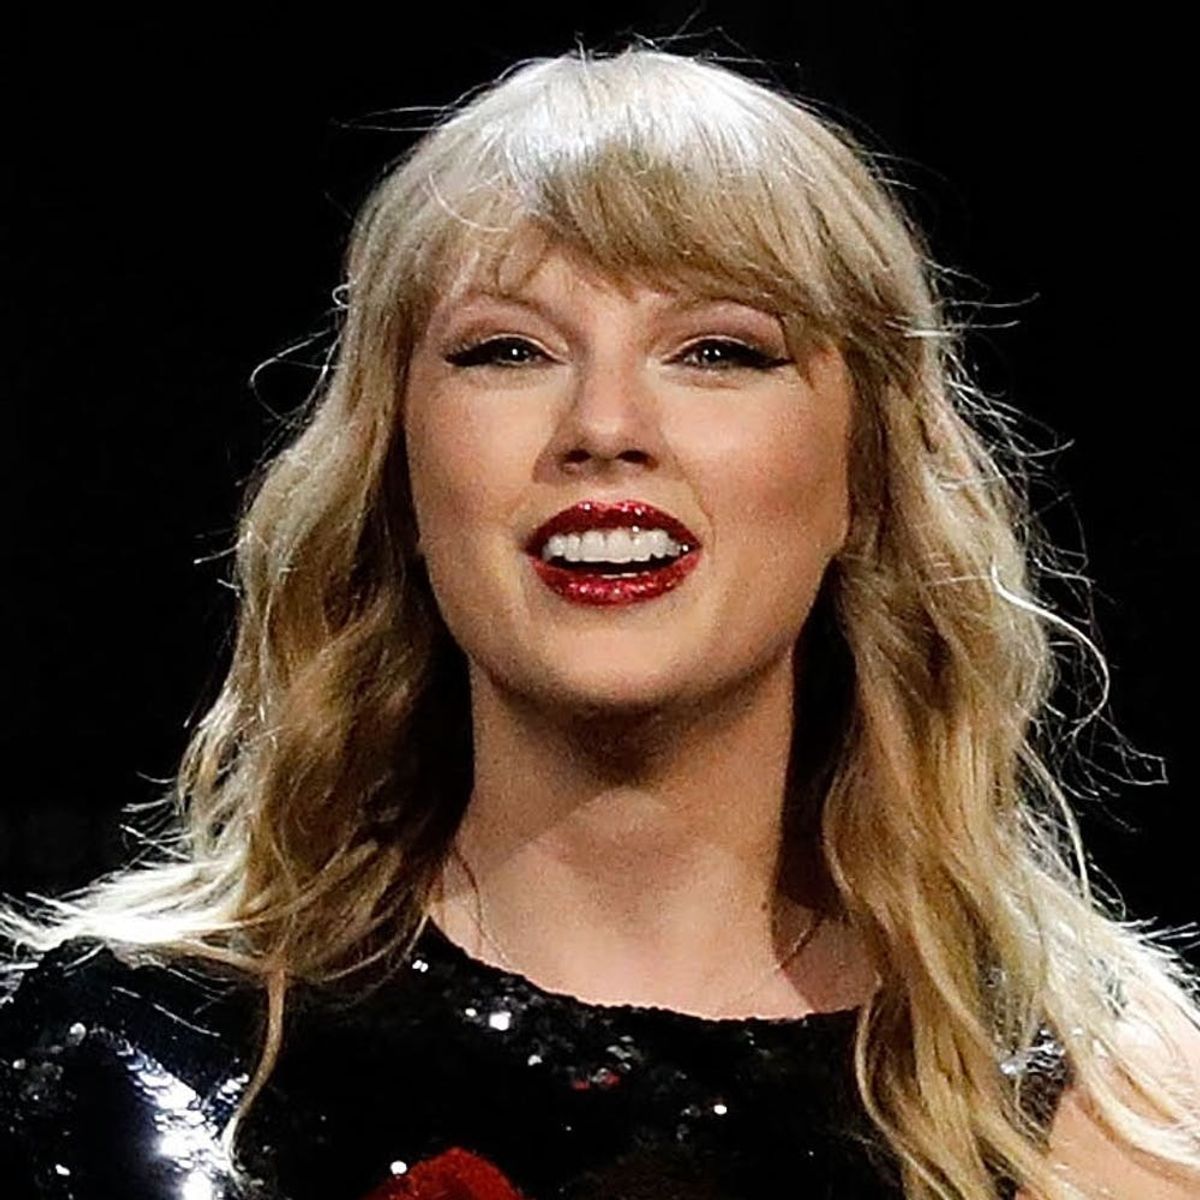 Taylor Swift Holding Hands With BF Joe Alwyn Is the Cutest Thing You’ll See All Day